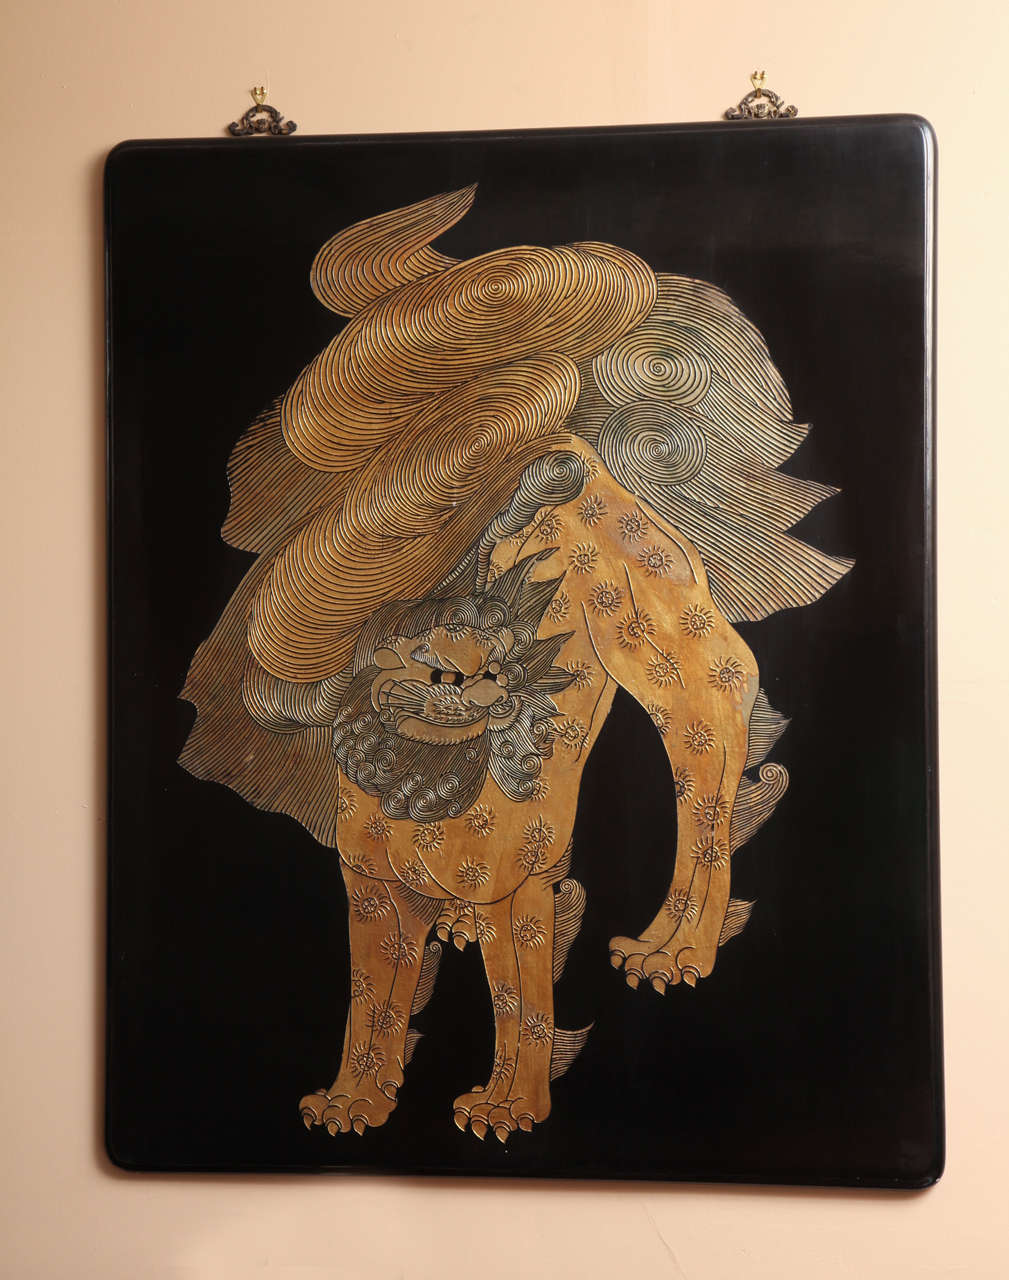 A Chinese carved and lacquered coromandel panel from the mid-20th century. Each panel features a typically Chinese stylized mythical guardian lion with gold leaf. The lion is lightly carved into the wood, with great attention paid to the delicate